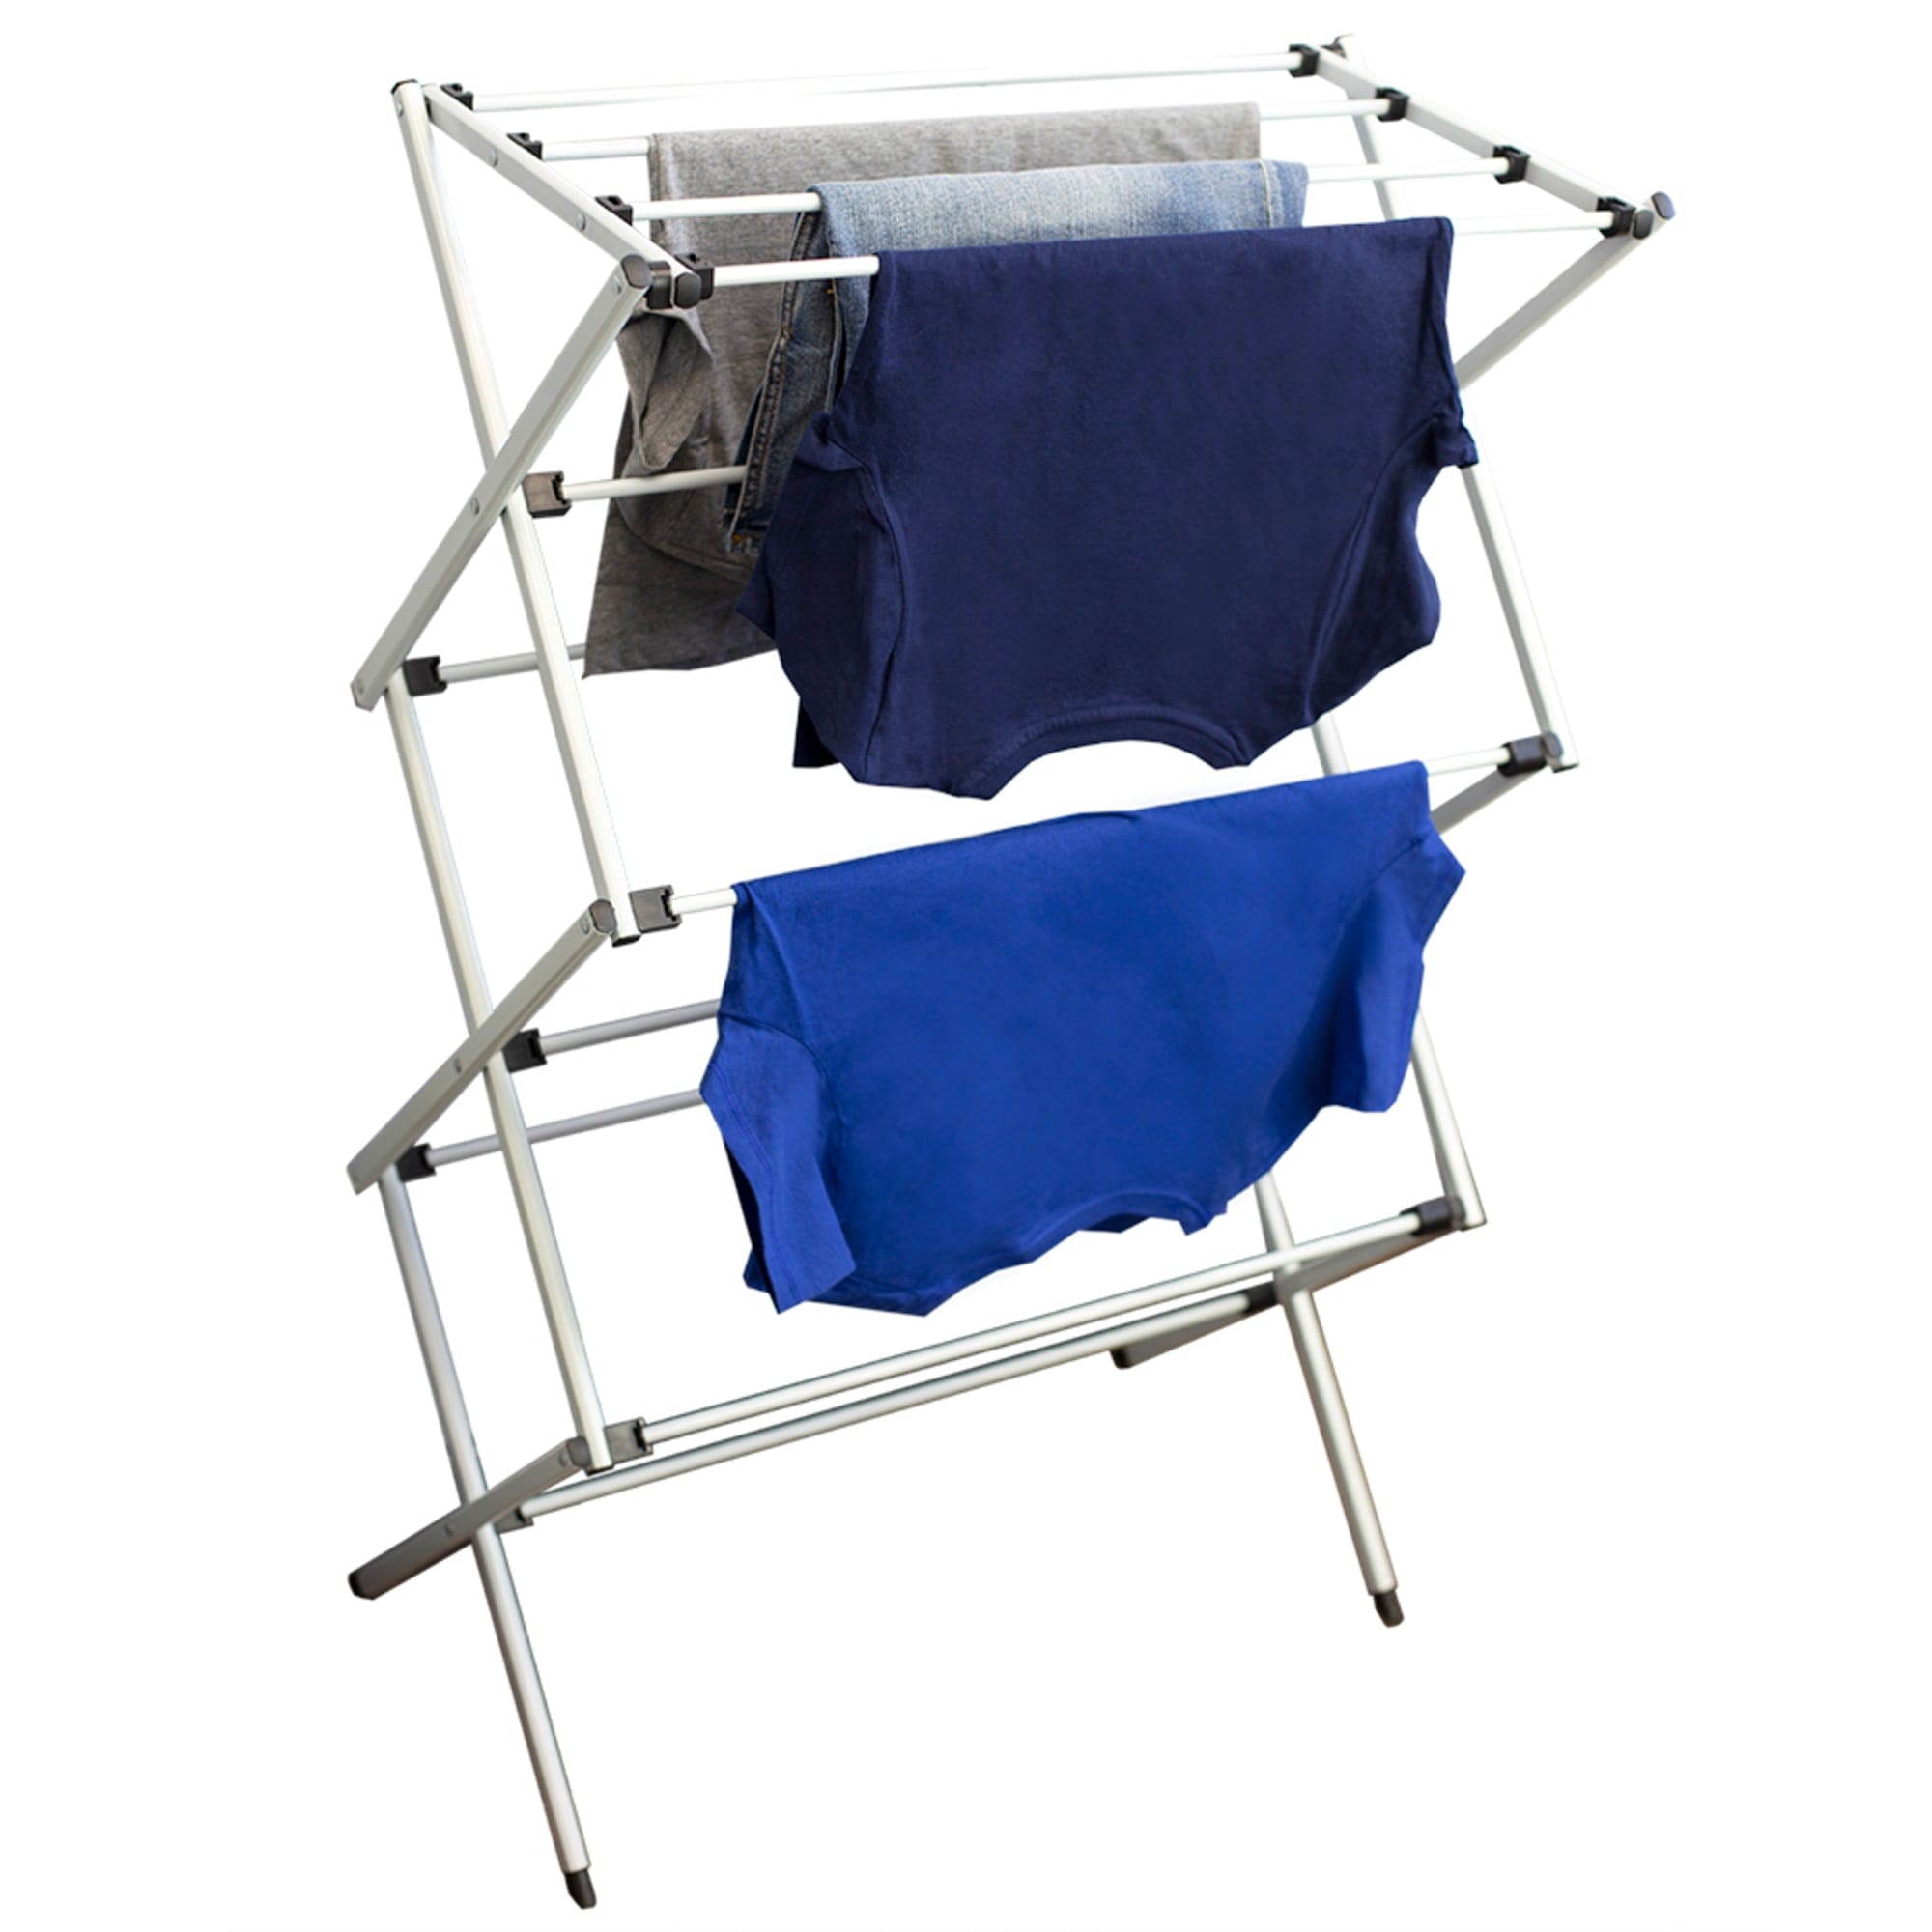 Home Basics Rust-Proof Collapsible Clothes Drying Rack, Grey $20.00 EACH, CASE PACK OF 4